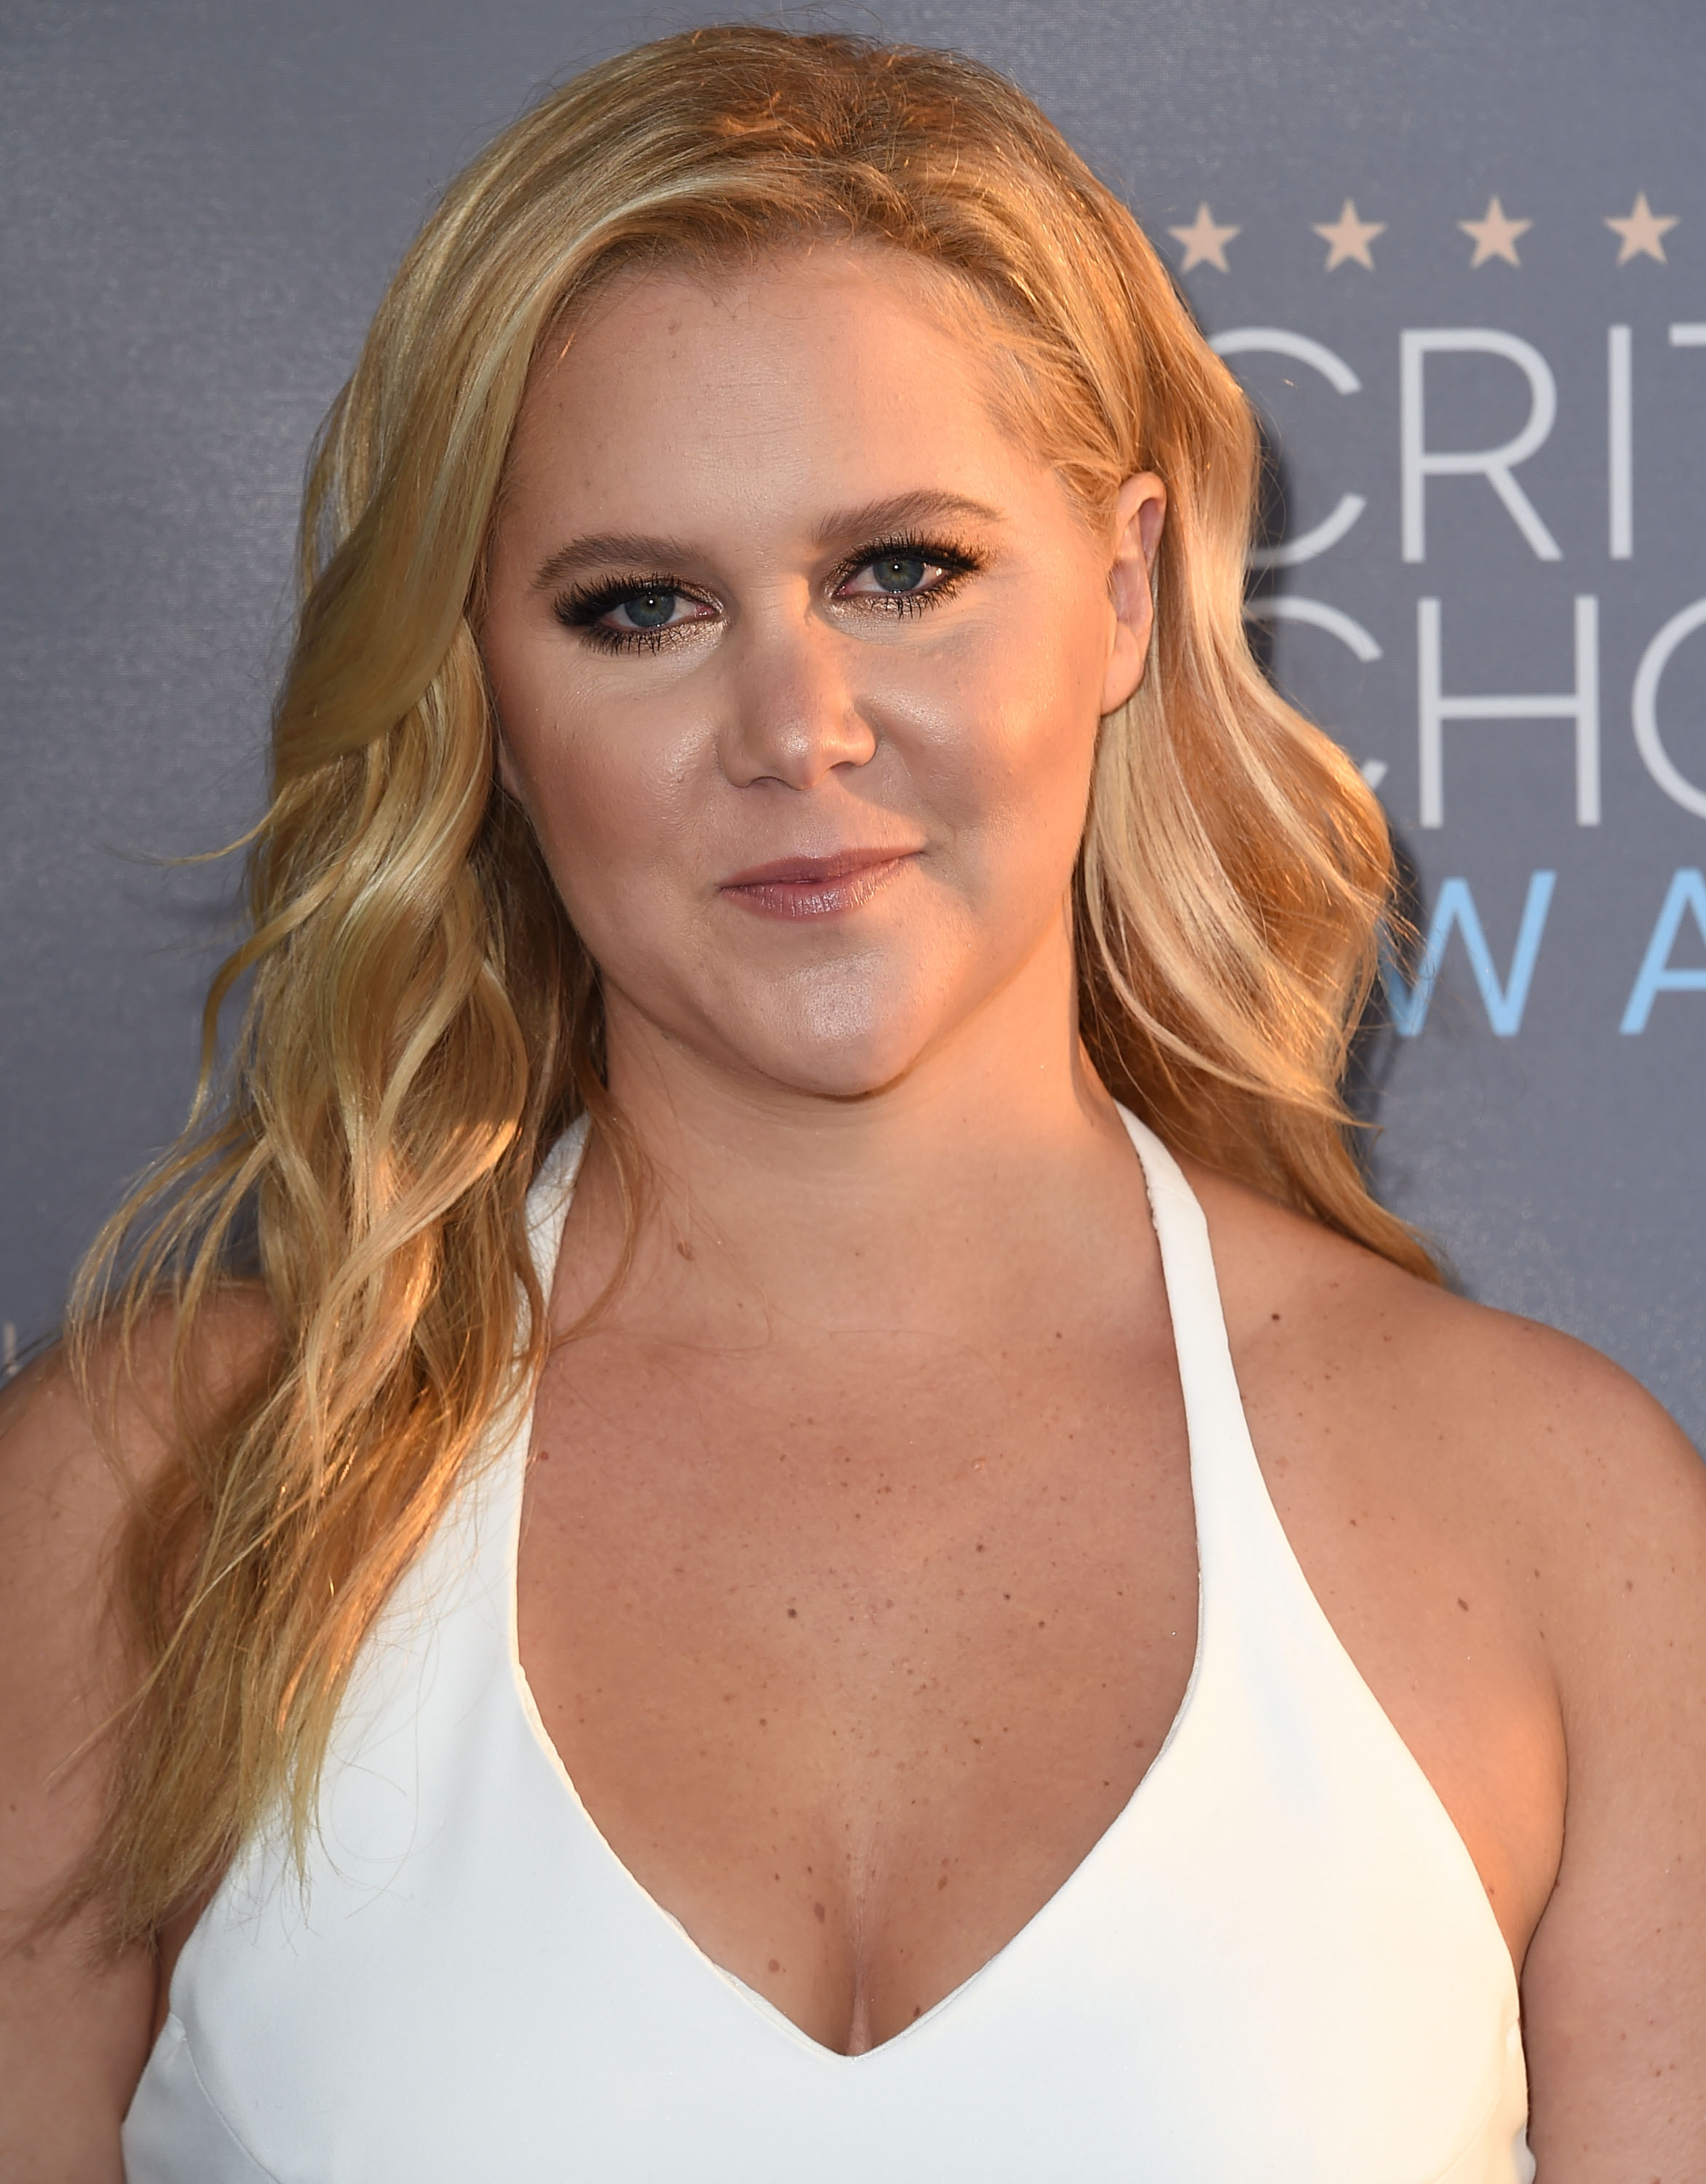 Amy Schumer arrives at the The 21st Annual Critics' Choice Awards at Barker Hangar in Santa Monica, Calif., on Jan. 17, 2016.